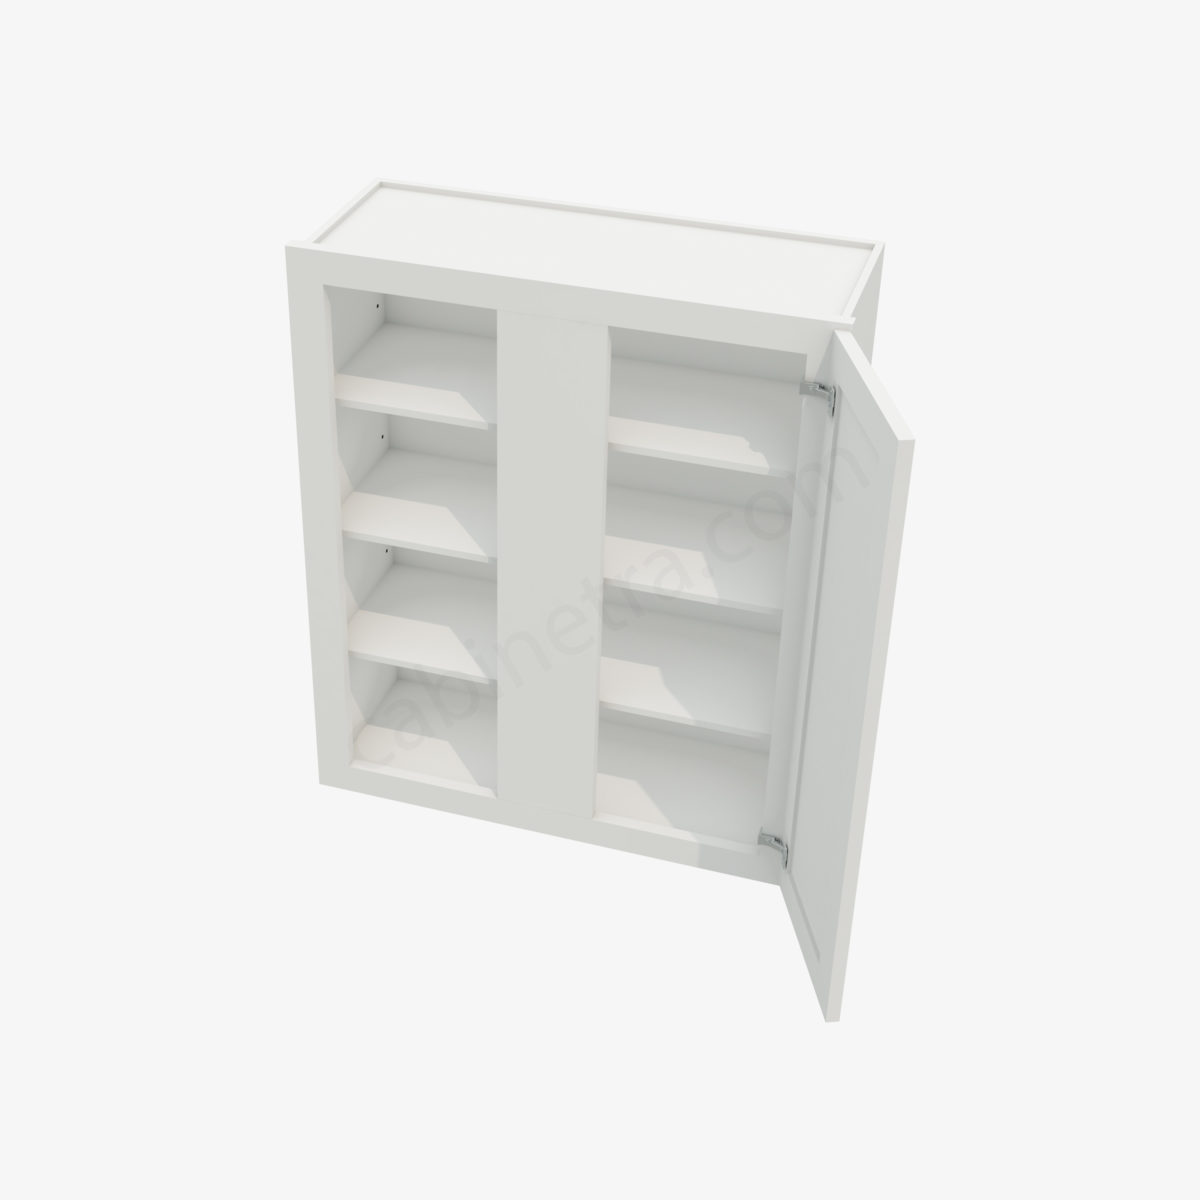 AW WBLC30 33 3036 5 Forevermark Ice White Shaker Cabinetra scaled